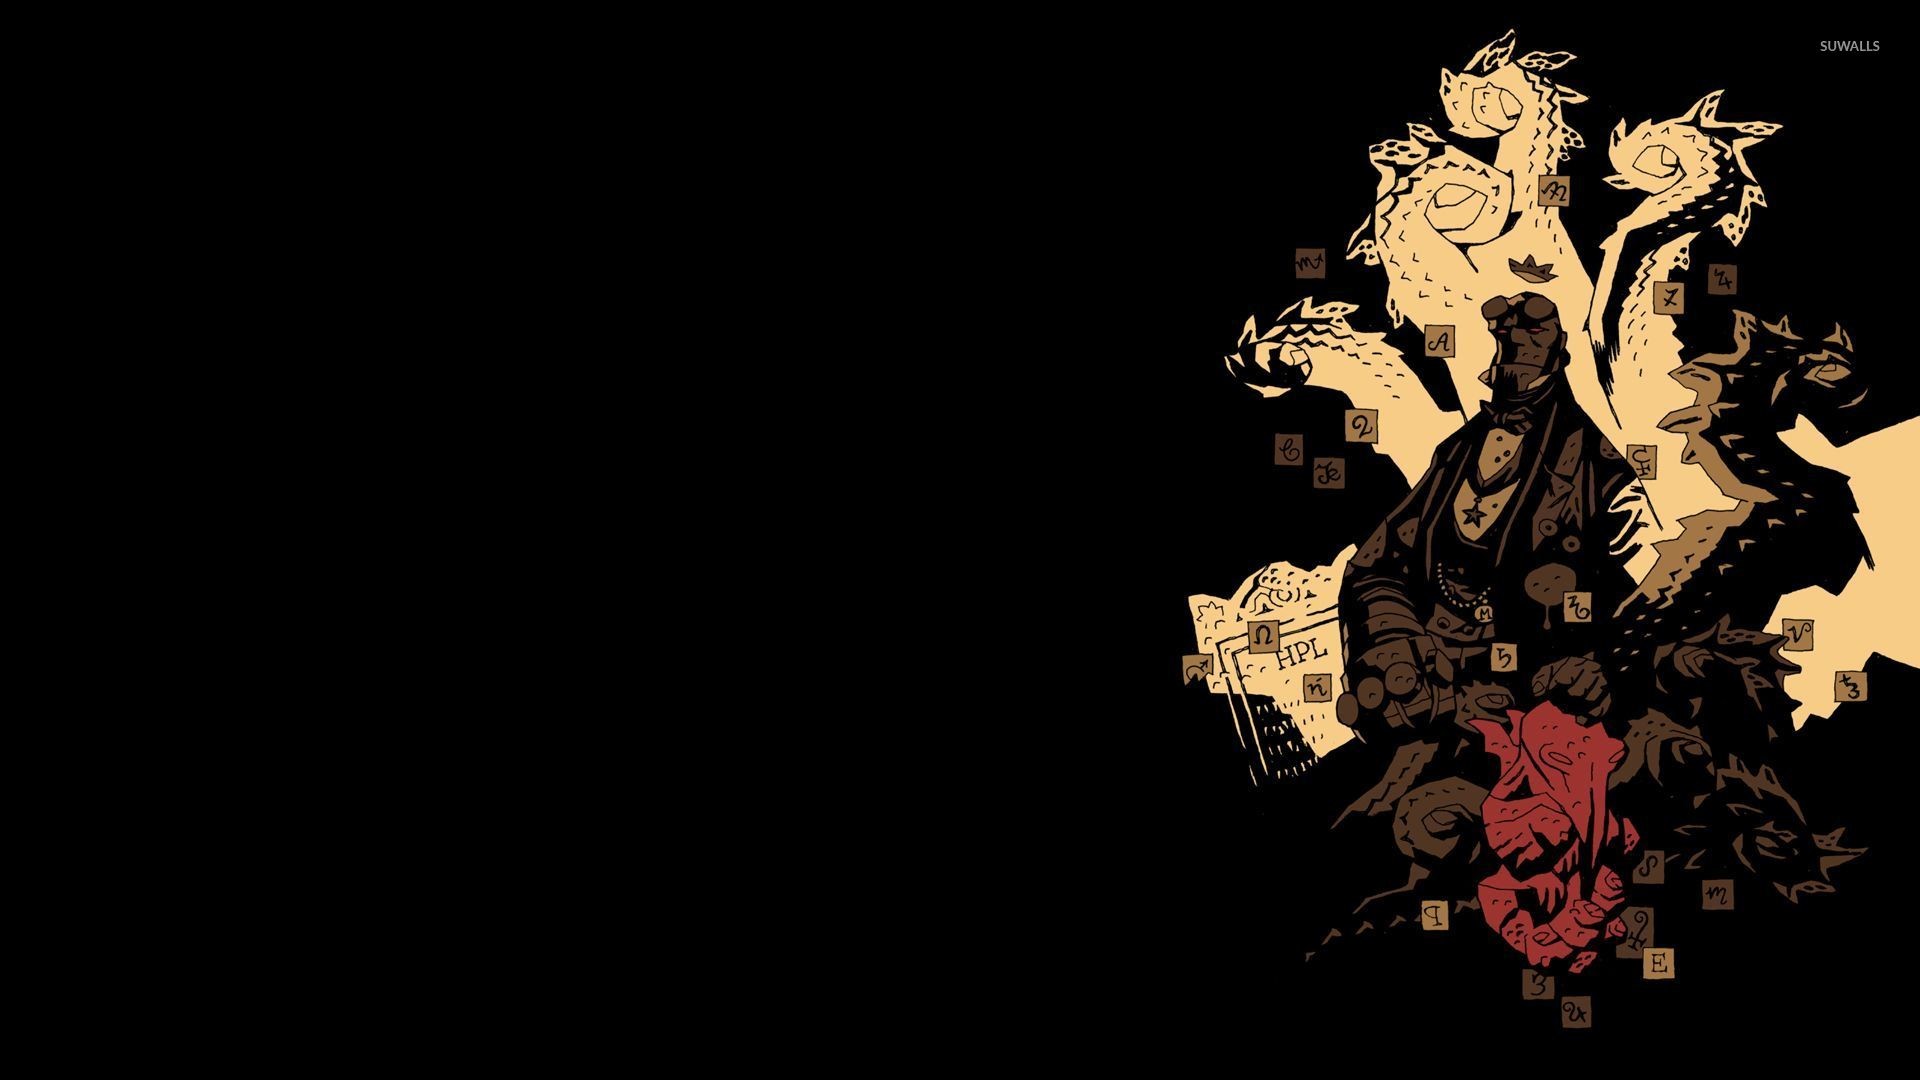 Hellboy The First 20 Years wallpaper jpg